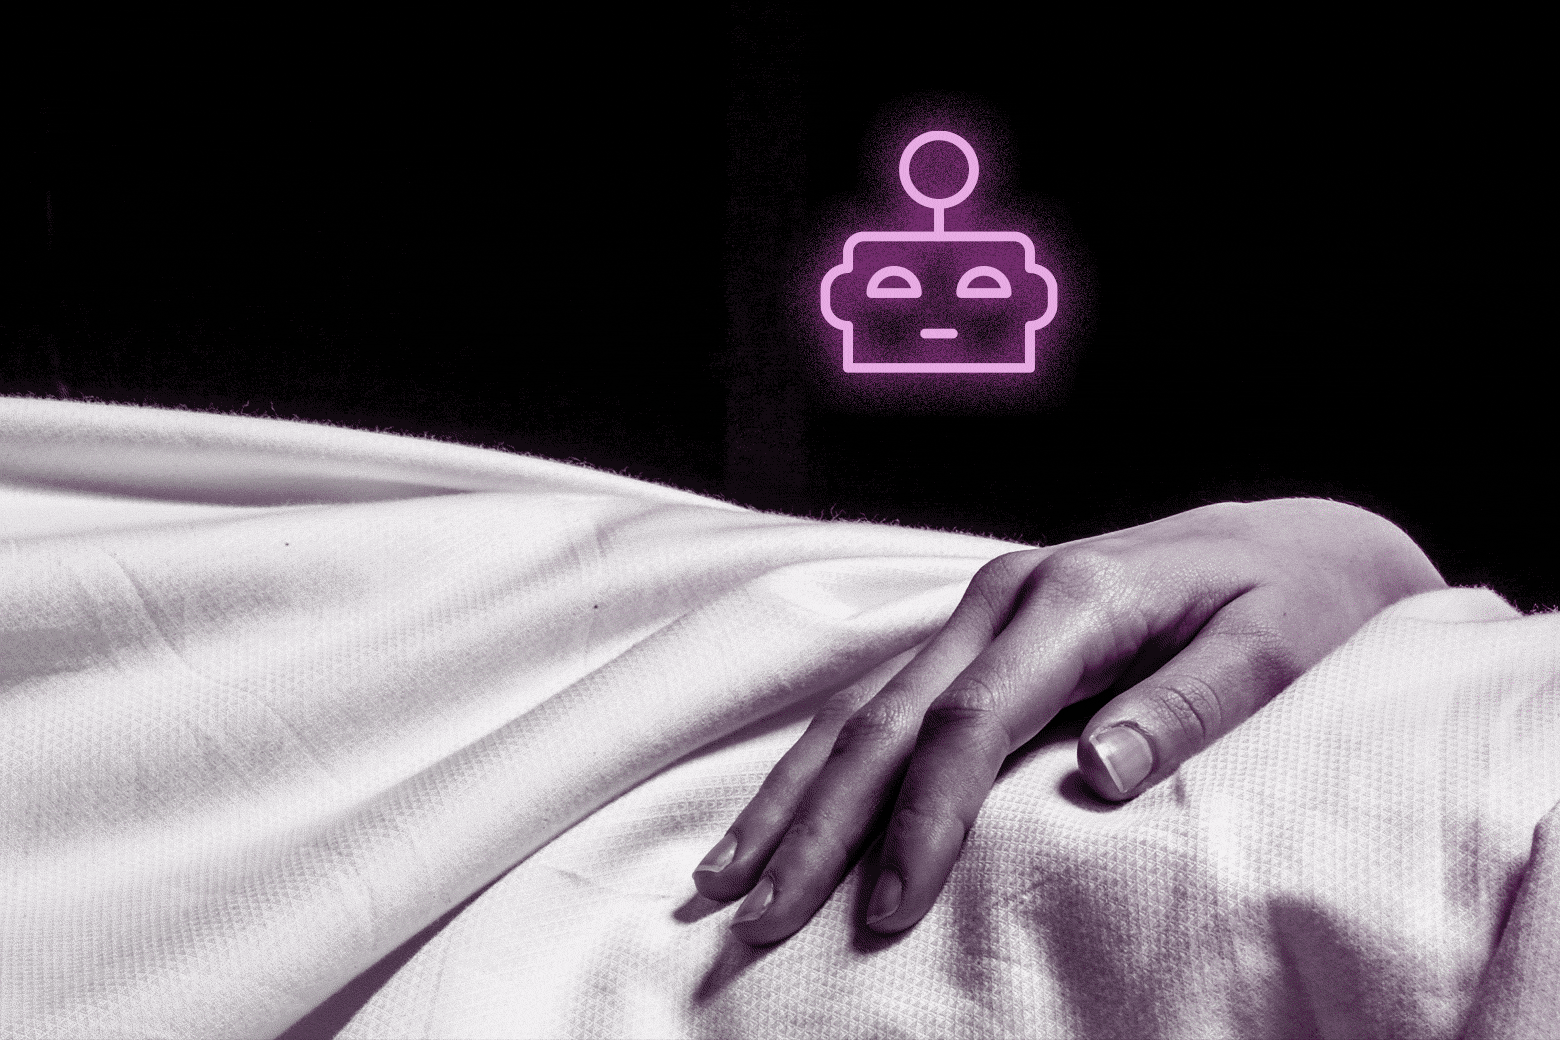 Robot emoji floating over someone's hand in bed.